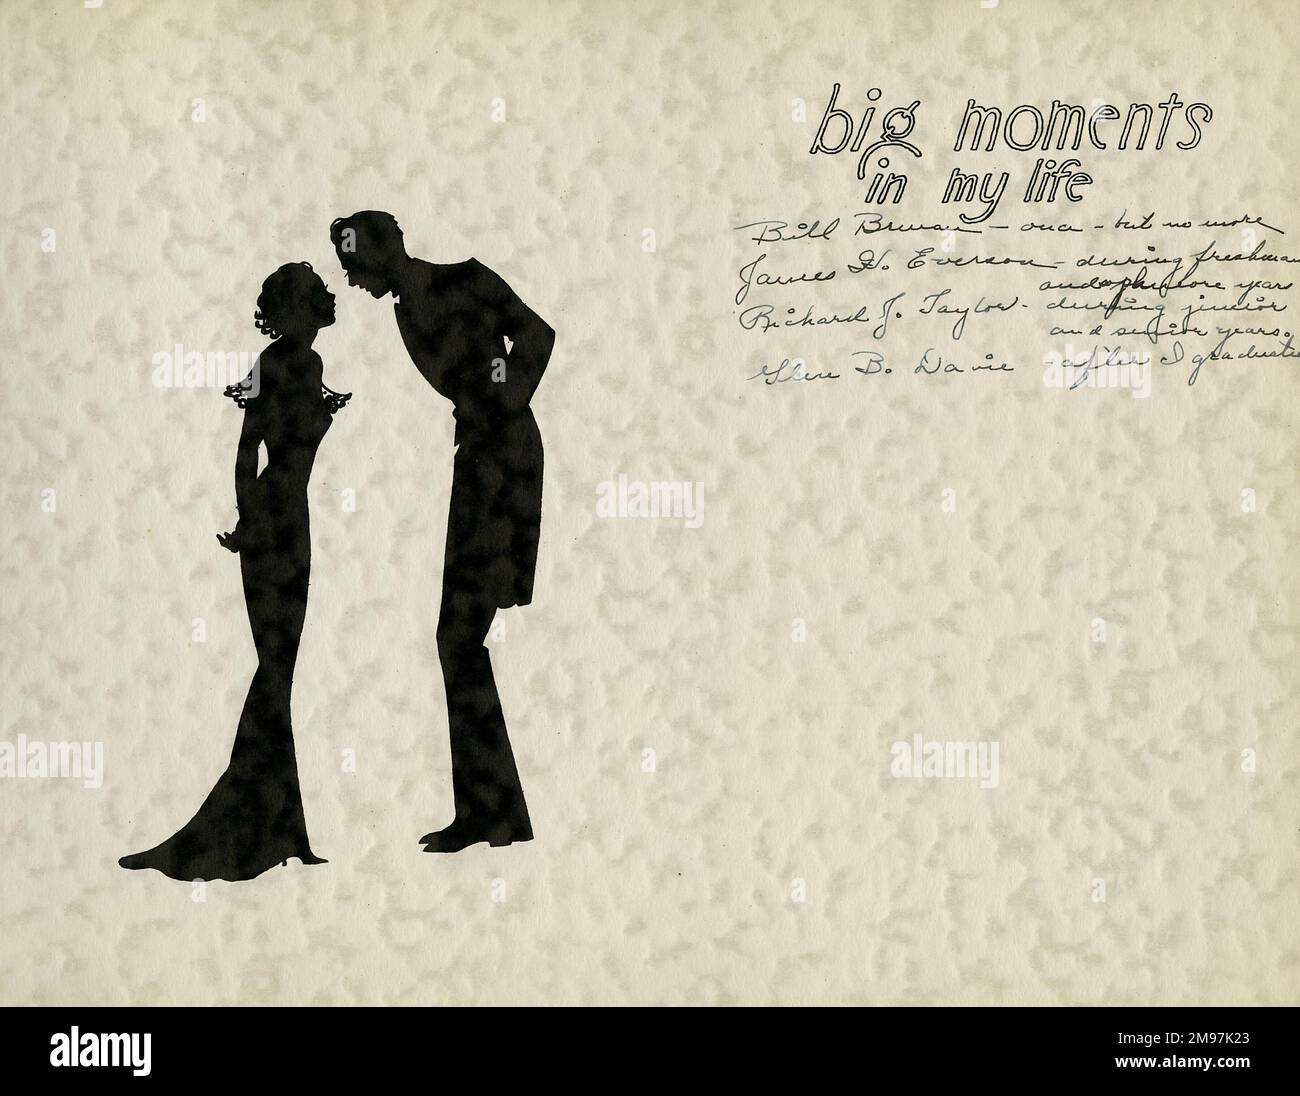 Page design for big moments in my life, in School Silhouettes, once owned by a female student of Fayetteville High School, New York, USA. Depicting a young woman and a young man in close conversation. Four men's names are written on the right, each one with a comment -- no doubt a list of boyfriends and ex-boyfriends. Stock Photo